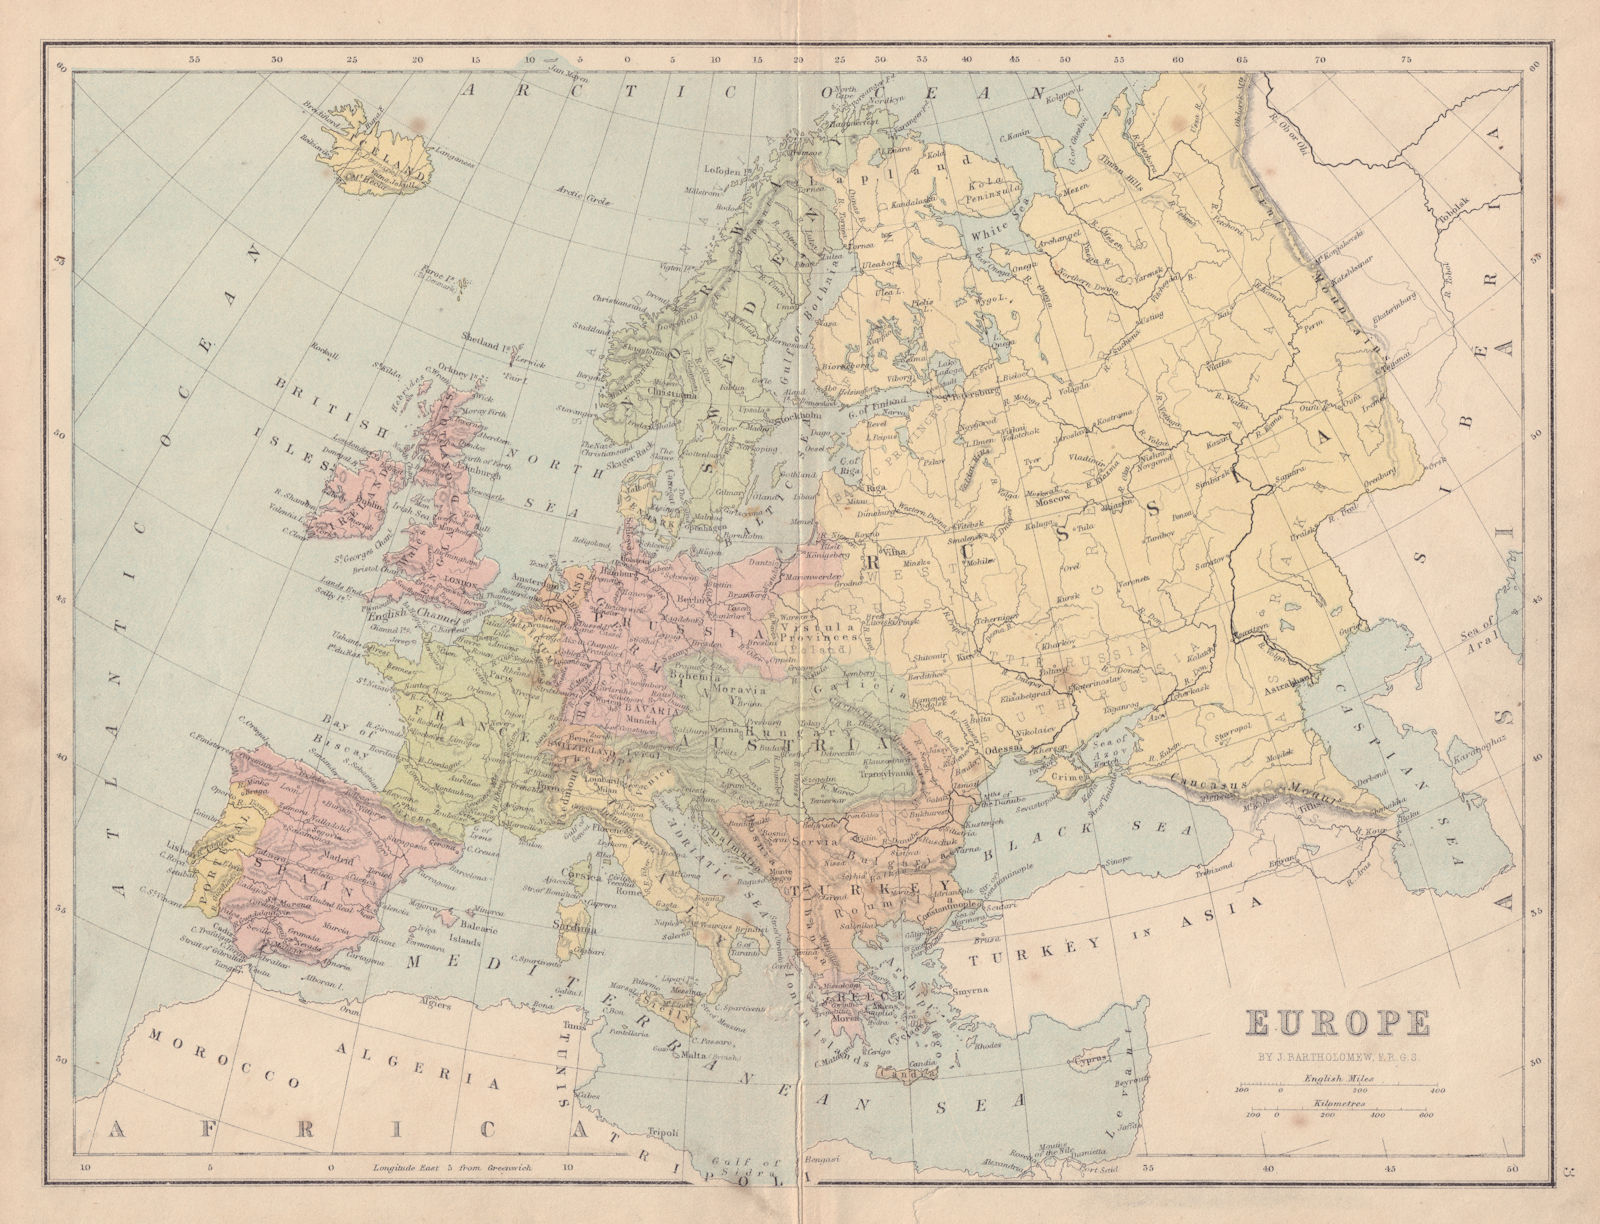 Associate Product EUROPE Political. United Germany marked as Prussia. COLLINS 1873 old map